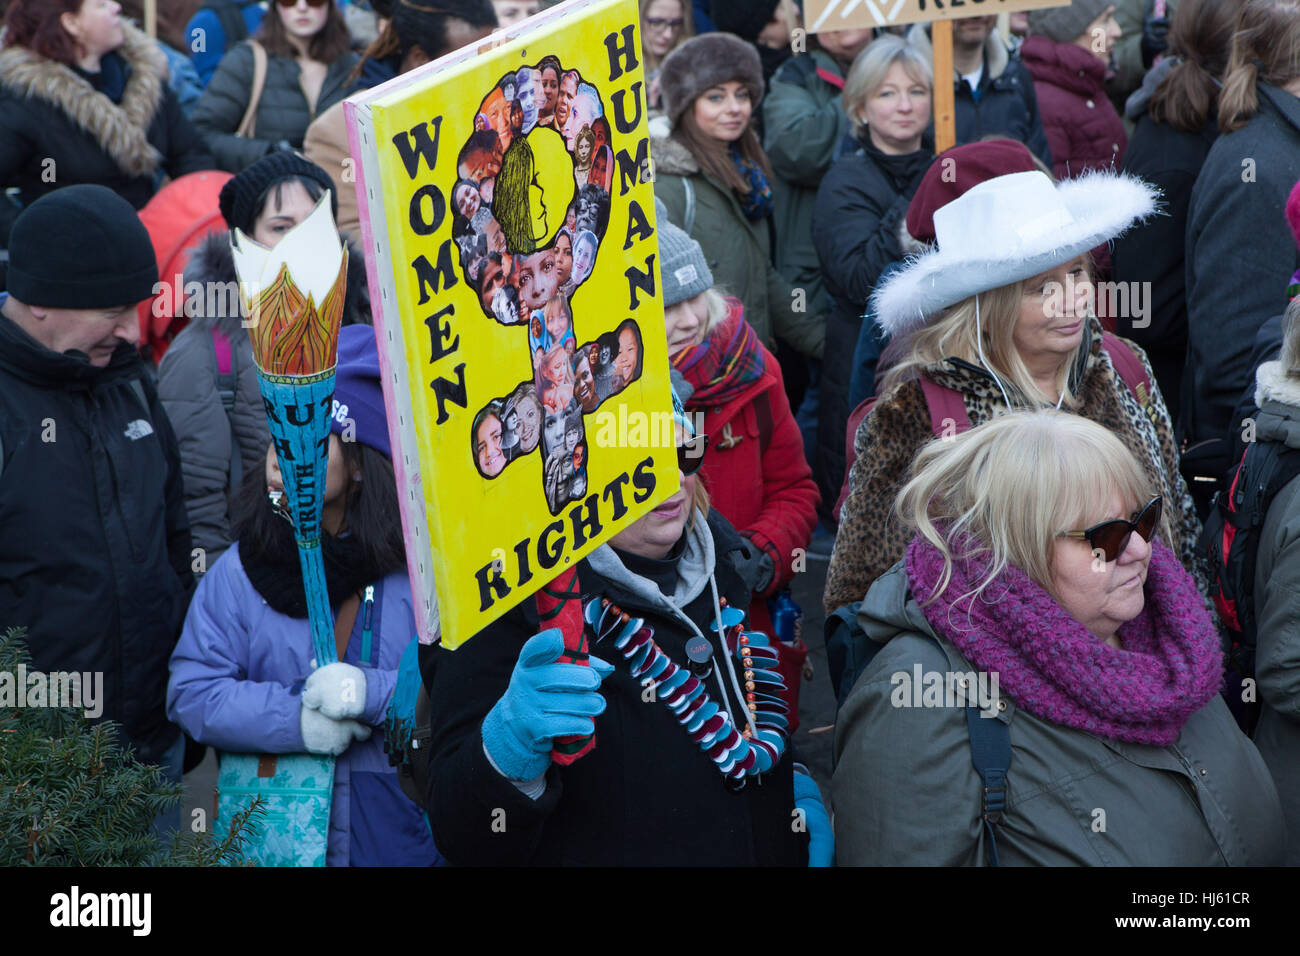 London, UK. 21st January, 2017.Protestors on Women's March marching through streets of London holding placard. Credit: Alan Gignoux/Alamy Live News Stock Photo